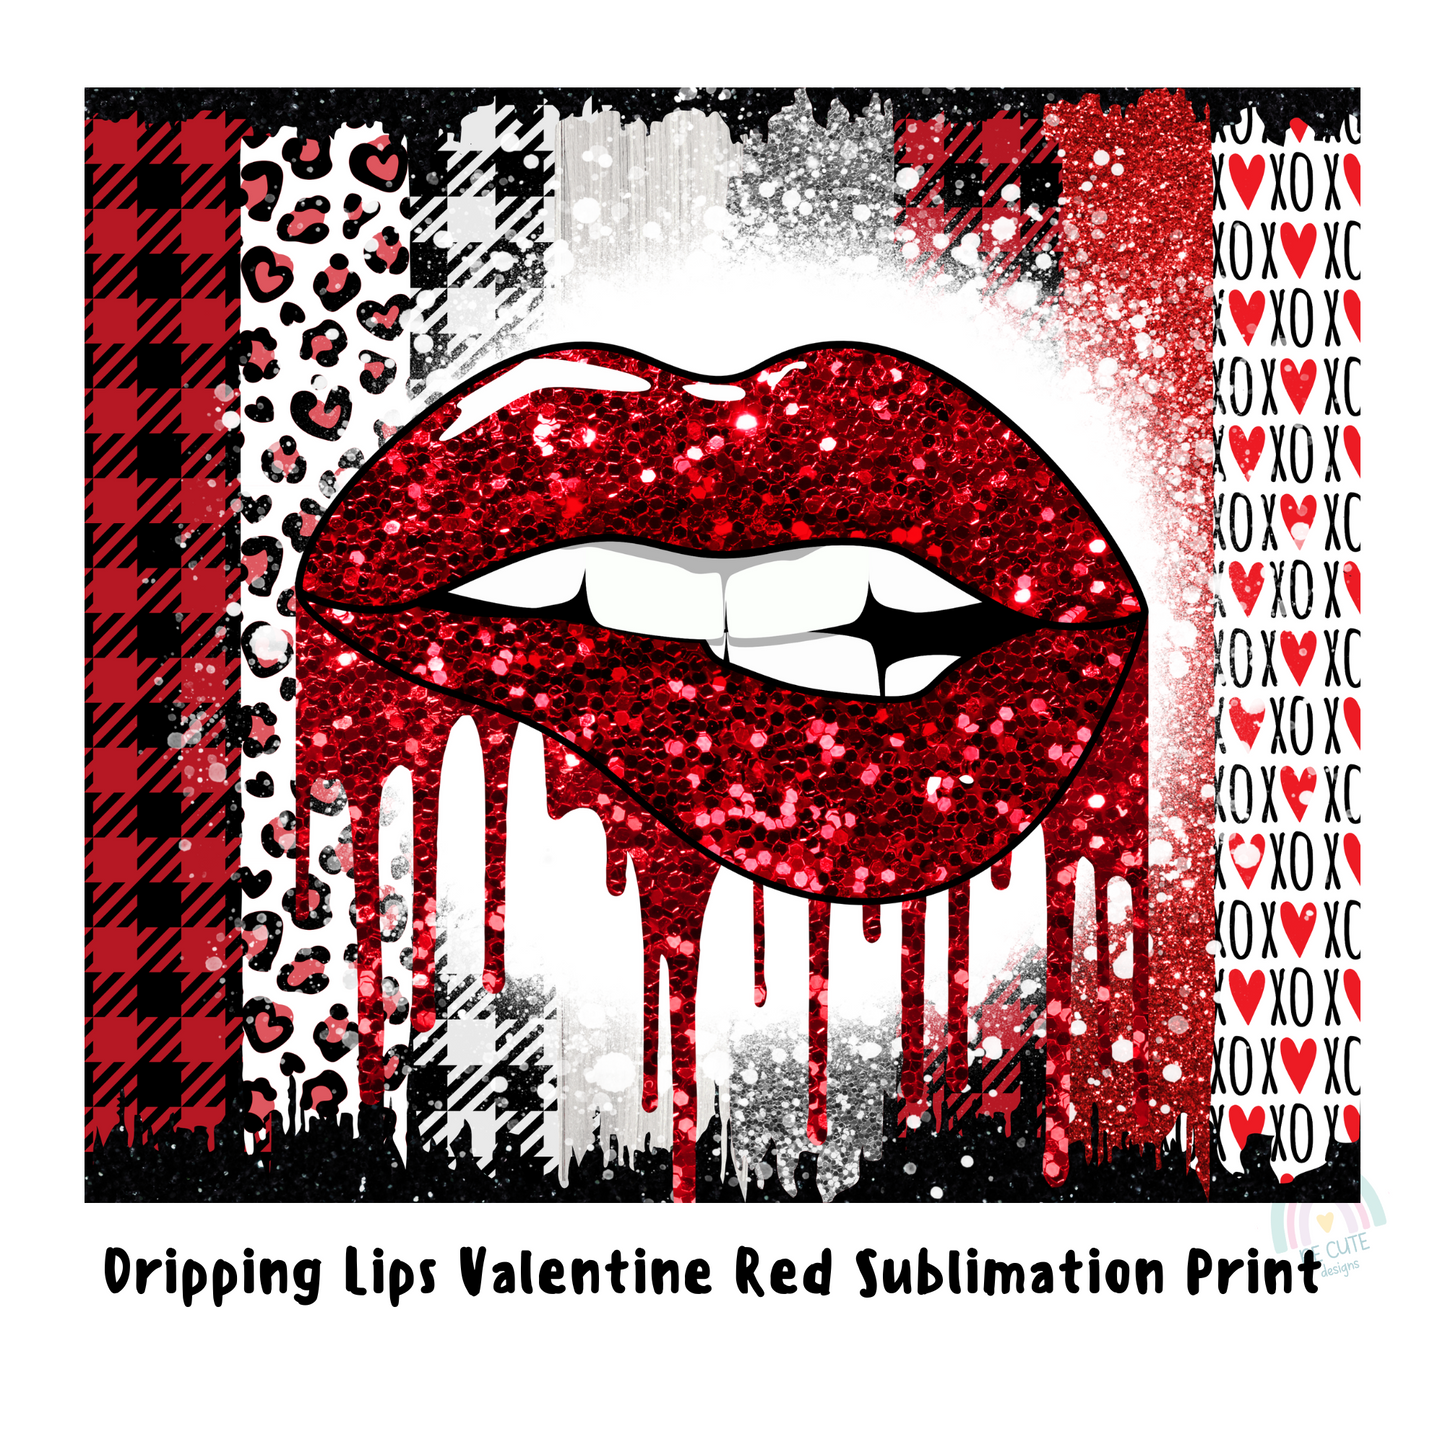 Dripping Lips Red Sublimation Print